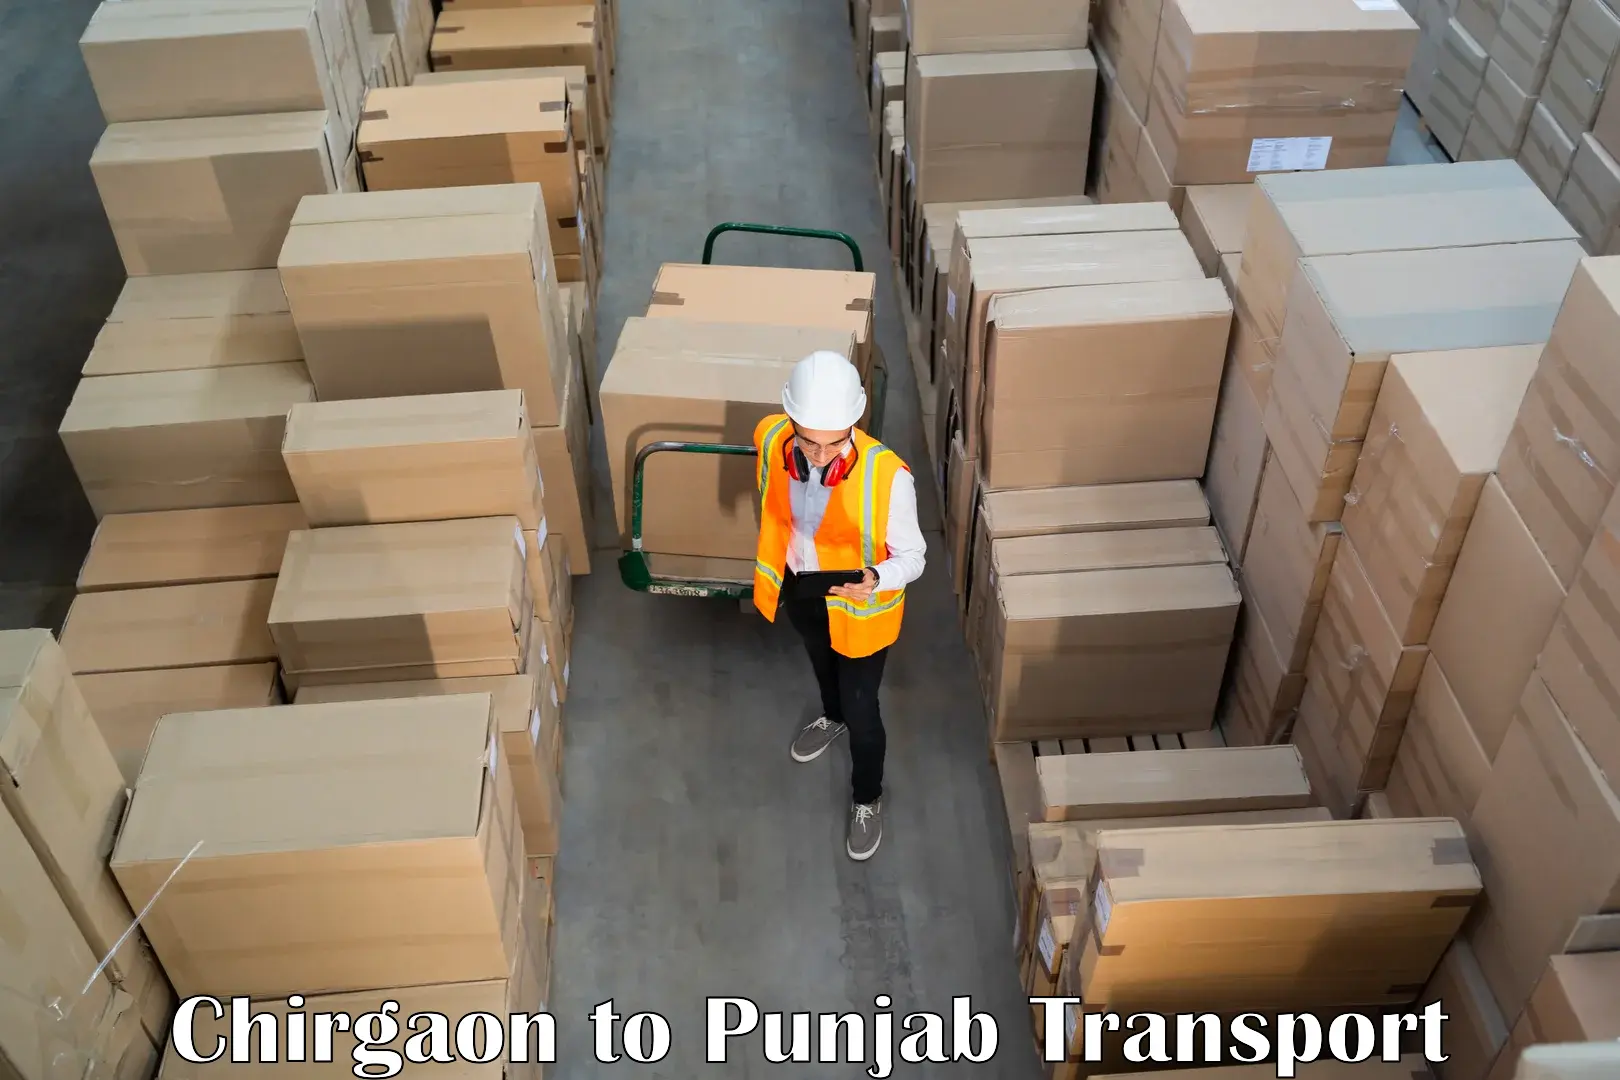 Container transport service Chirgaon to Ludhiana